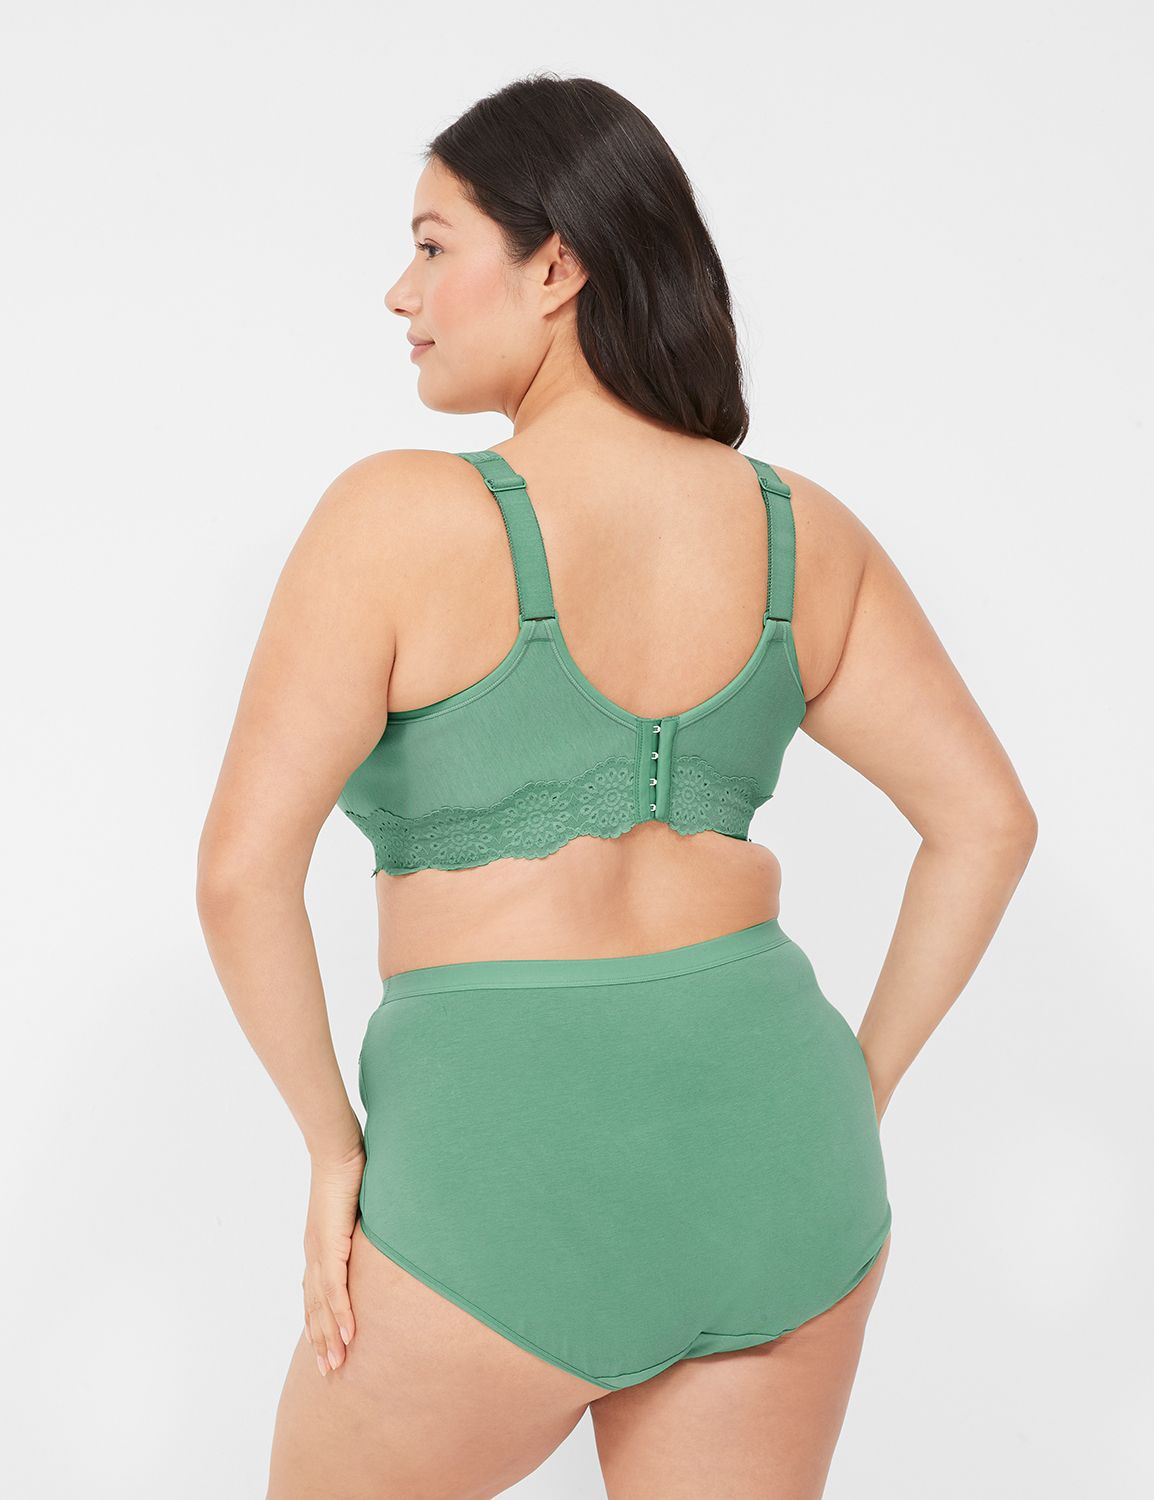 NWT Cacique Bra 44 H Full Coverage - Green Lace Invisible Back Smoother  $67.95 